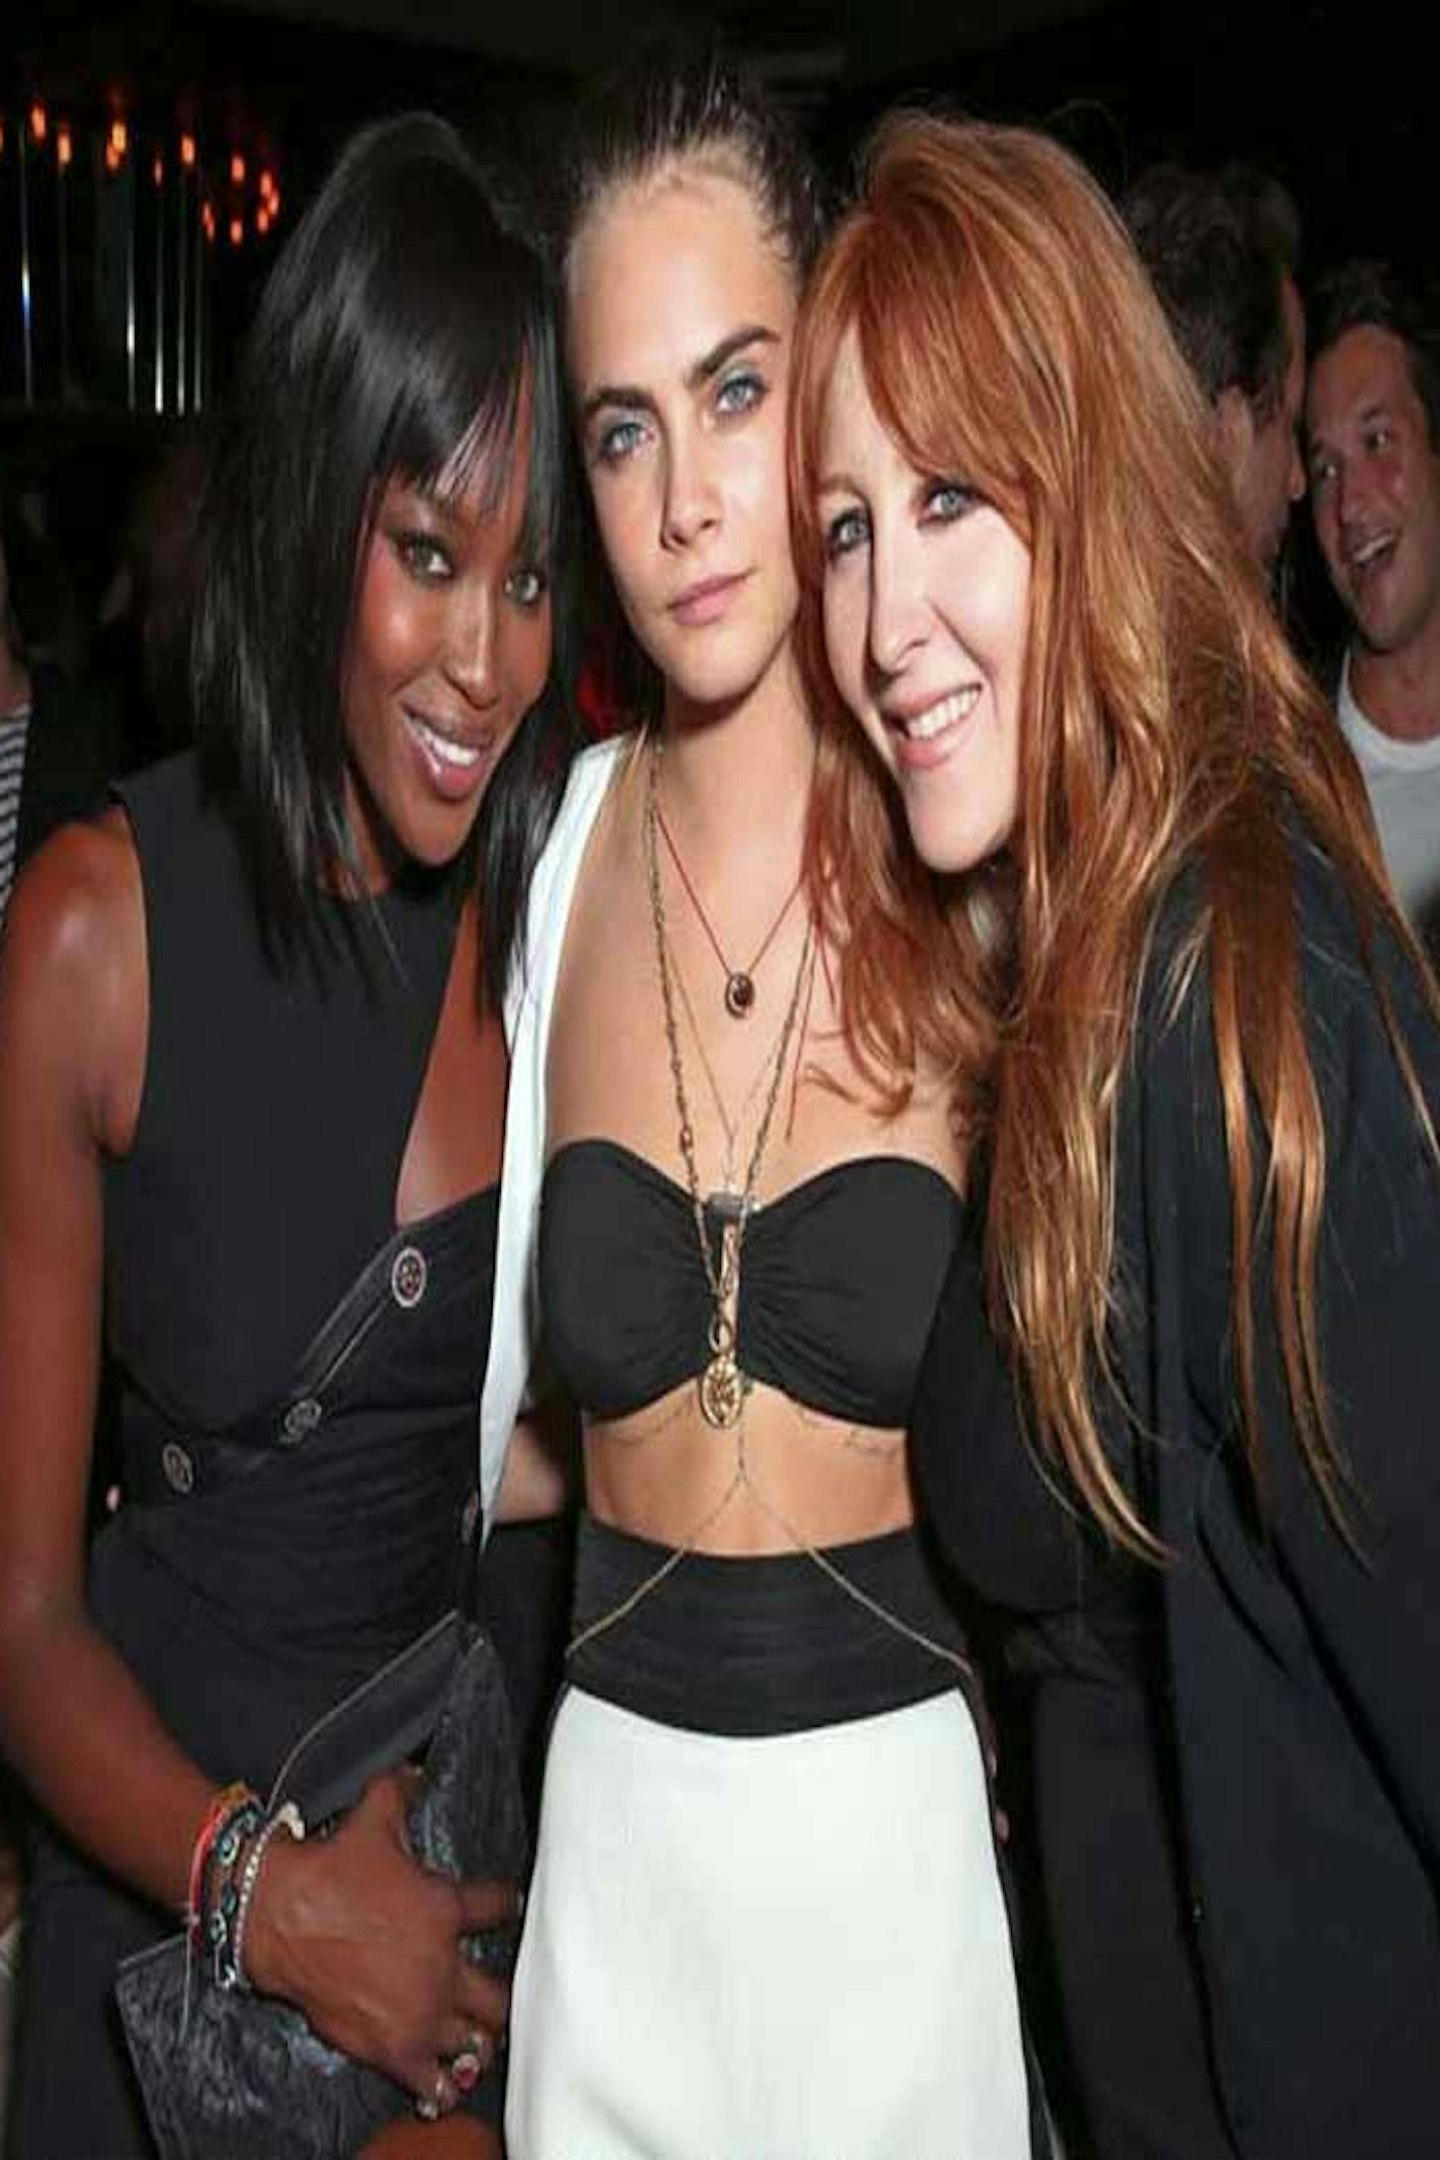 Naomi Campball, Cara Delevingne and Charlotte Tilbury at 'Cell for gratitude' charity event